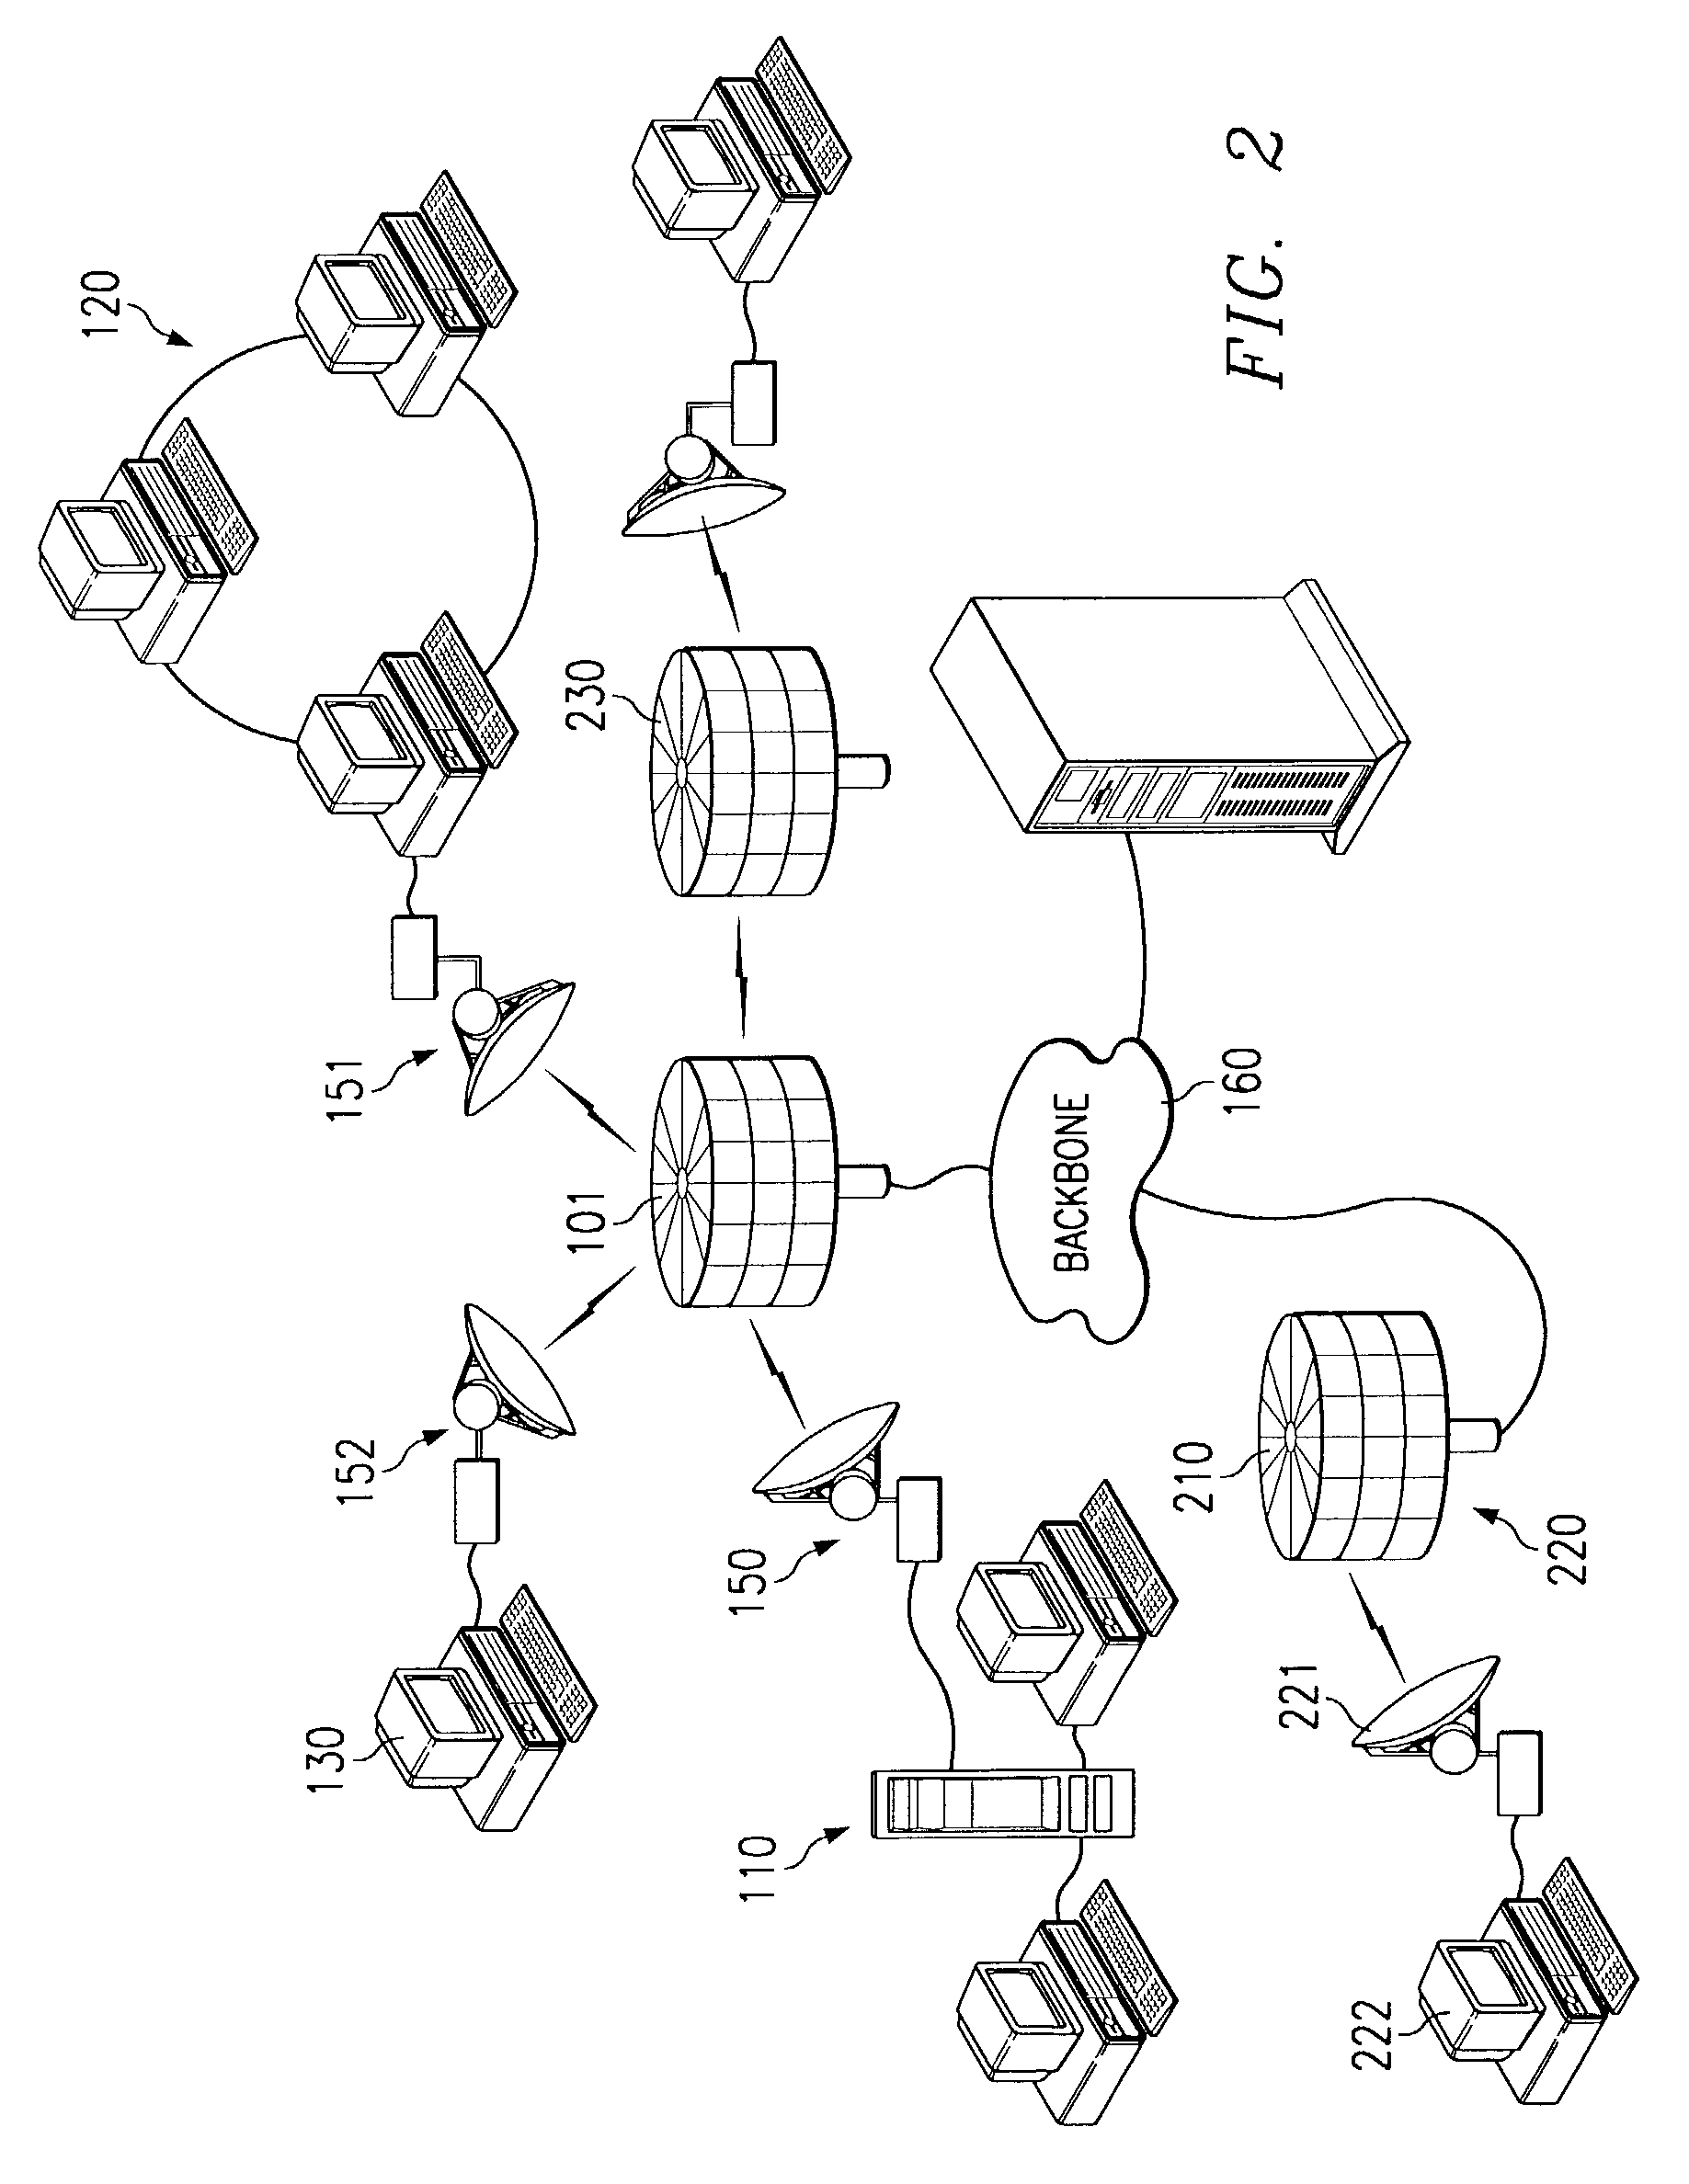 System and method for minimizing guard time in a time division duplex communication system